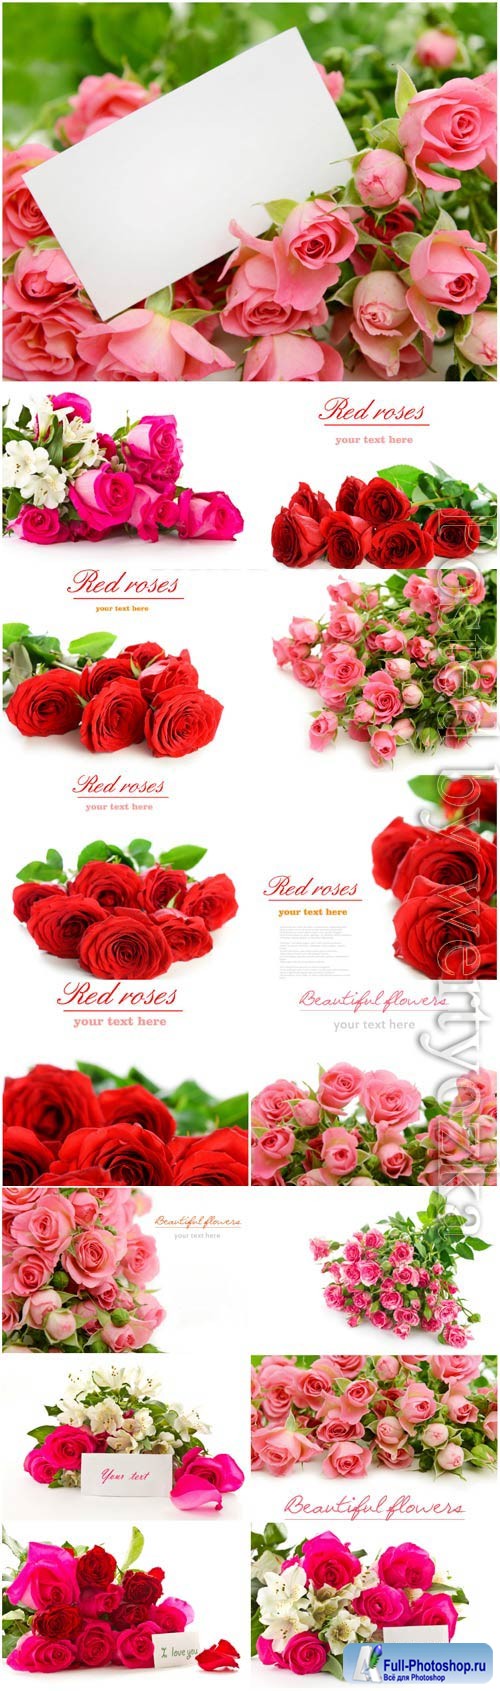 Bouquets of lovely roses stock photo